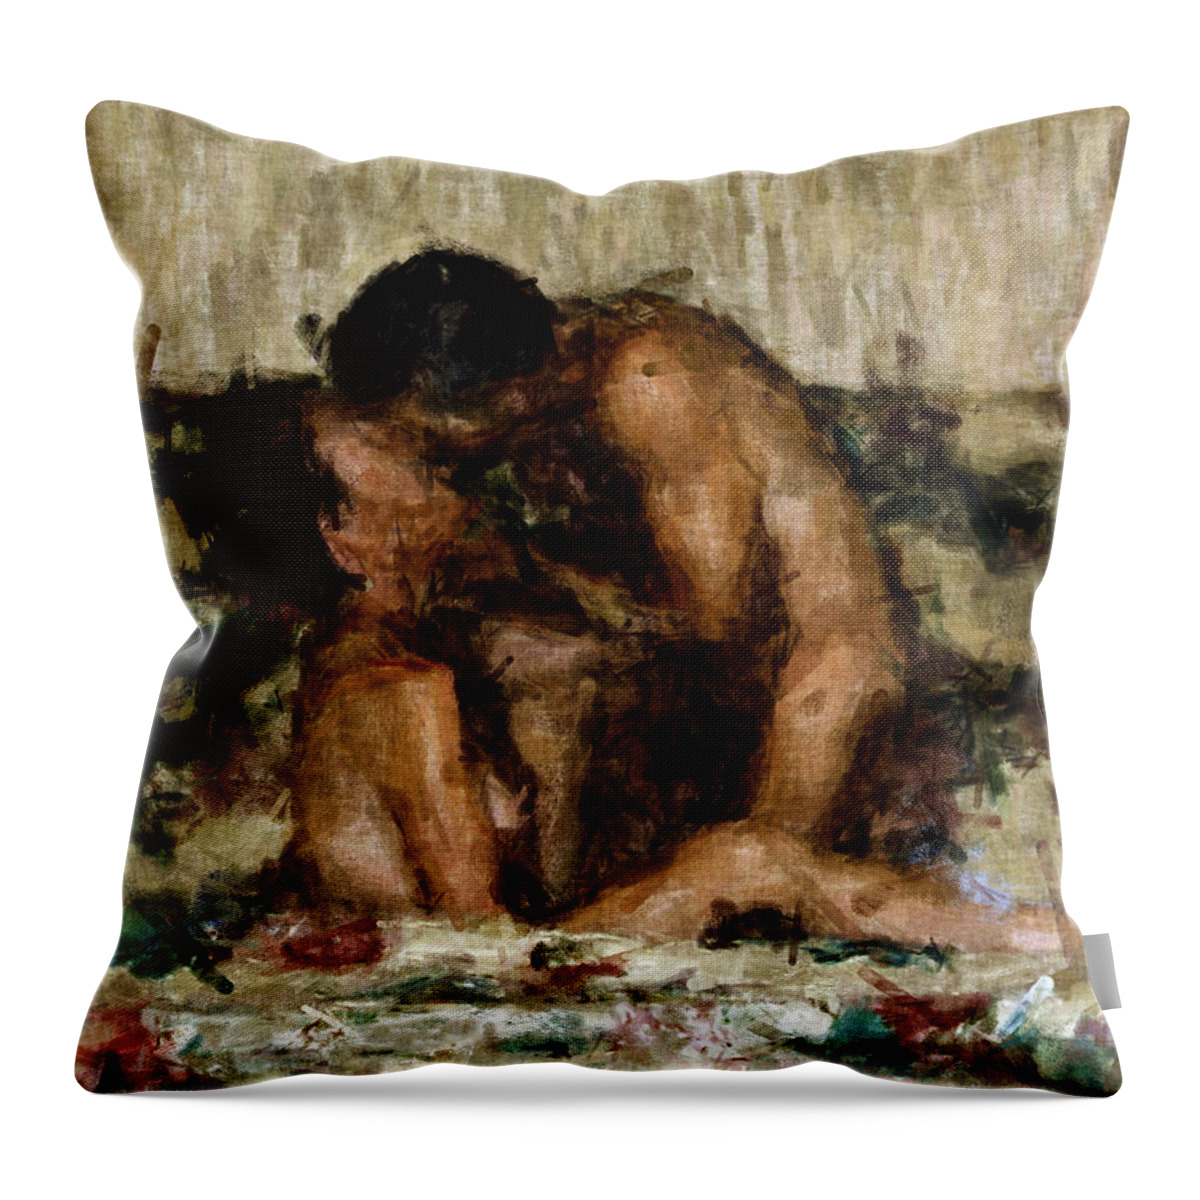 Nudes Throw Pillow featuring the photograph I Adore You by Kurt Van Wagner